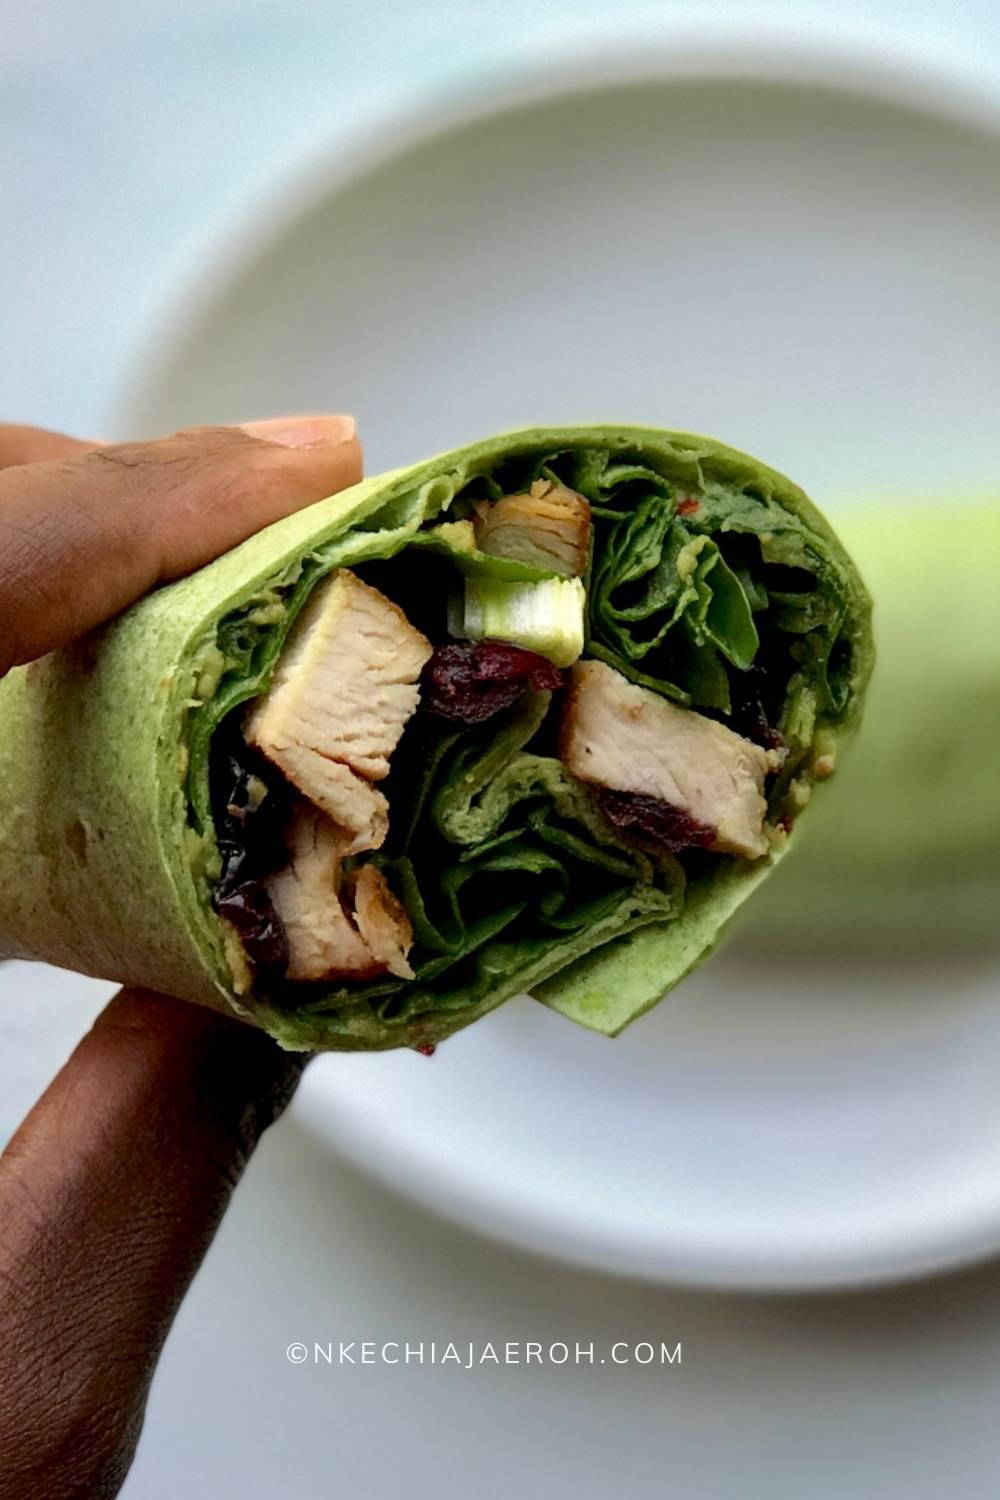 Super easy to make healthy taco recipe comprising of "Garden Spinach Herb Wrap," aka, the taco shell. Then filled up with well-seasoned and sautéed chicken breast, fresh spinach leaves, and spicy guacamole. Dry cranberries and green onions are optional, however necessary. Typically taco sizes range from small hand-sized tortillas, like 8-inch to 12-inch corn or flour tortillas. Though taco originated in Mexico, it is very much acceptable in most parts of the world. Taco recipe is adaptable, versatile, and easily customizable. #Taco #Tacorecipe #healthytaco #spinachwrap #Greentacowrap